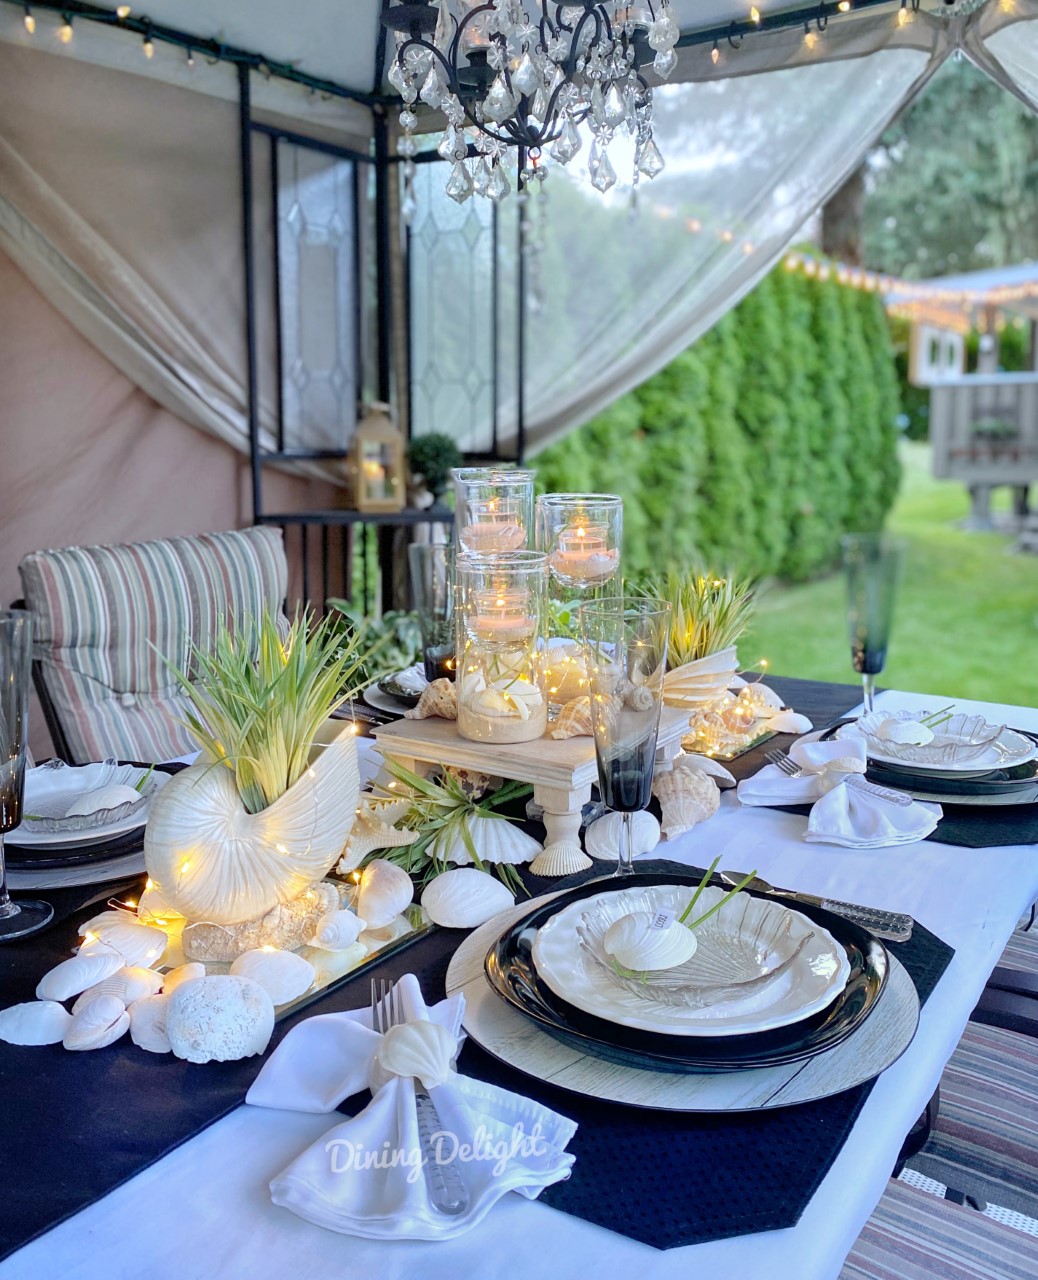 Dining Delight: Coastal Themed Tablescape in Black & White